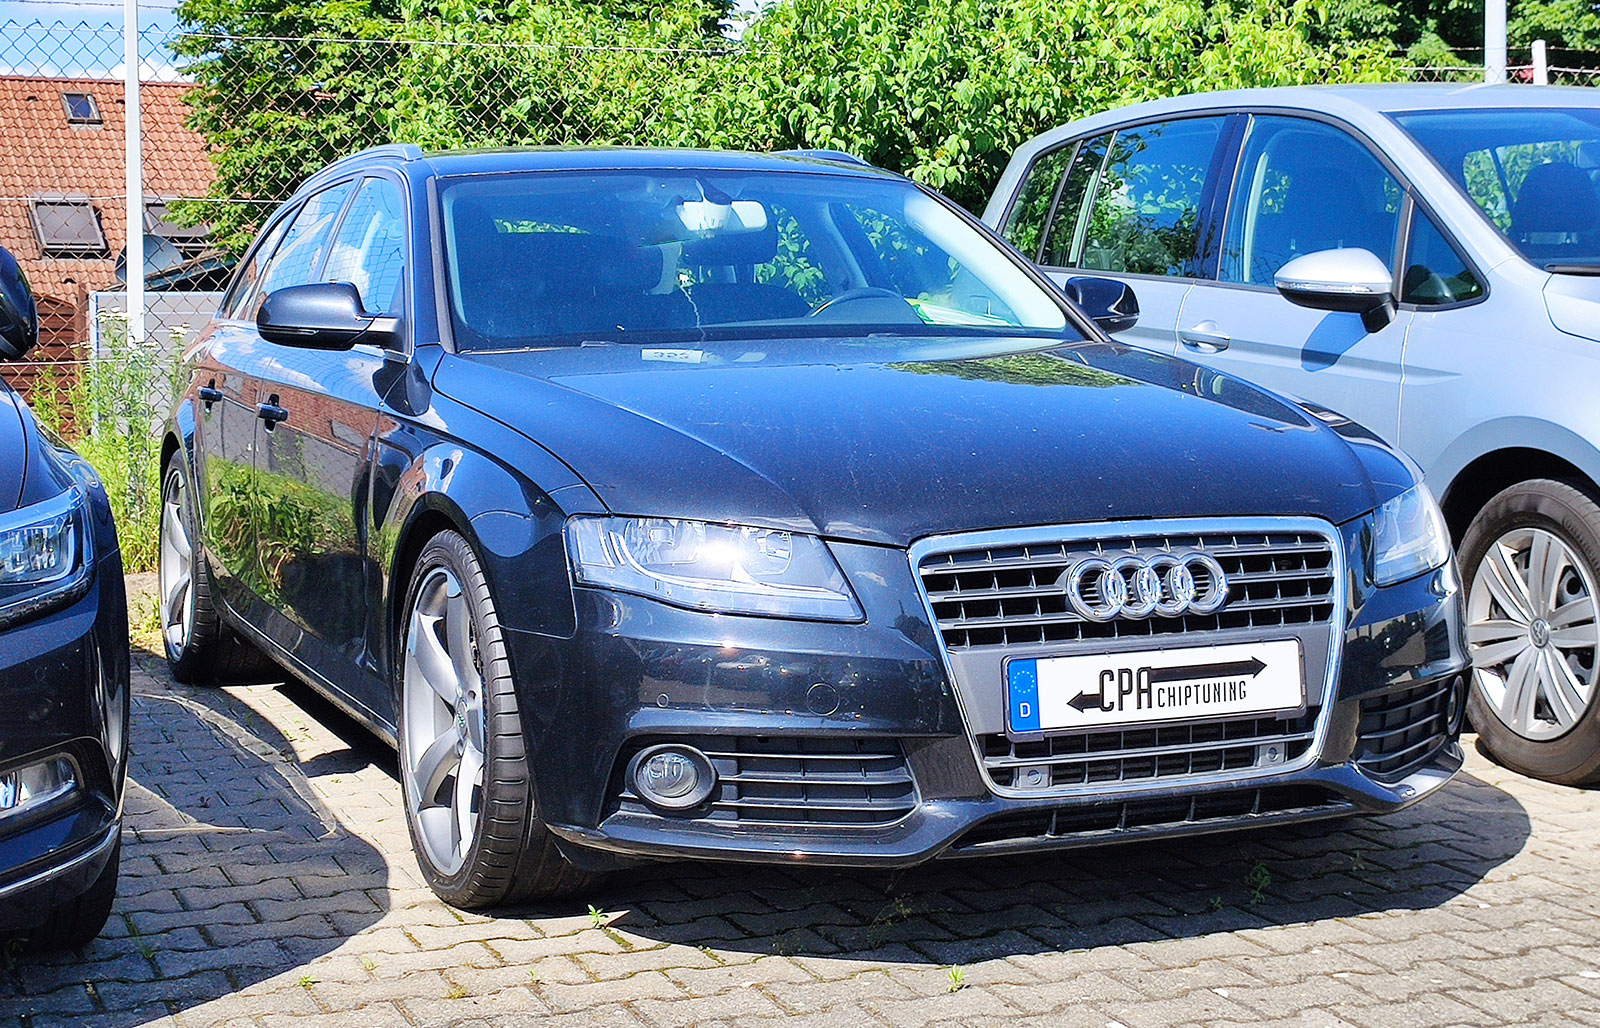 Chiptuning for Audi A4 B8